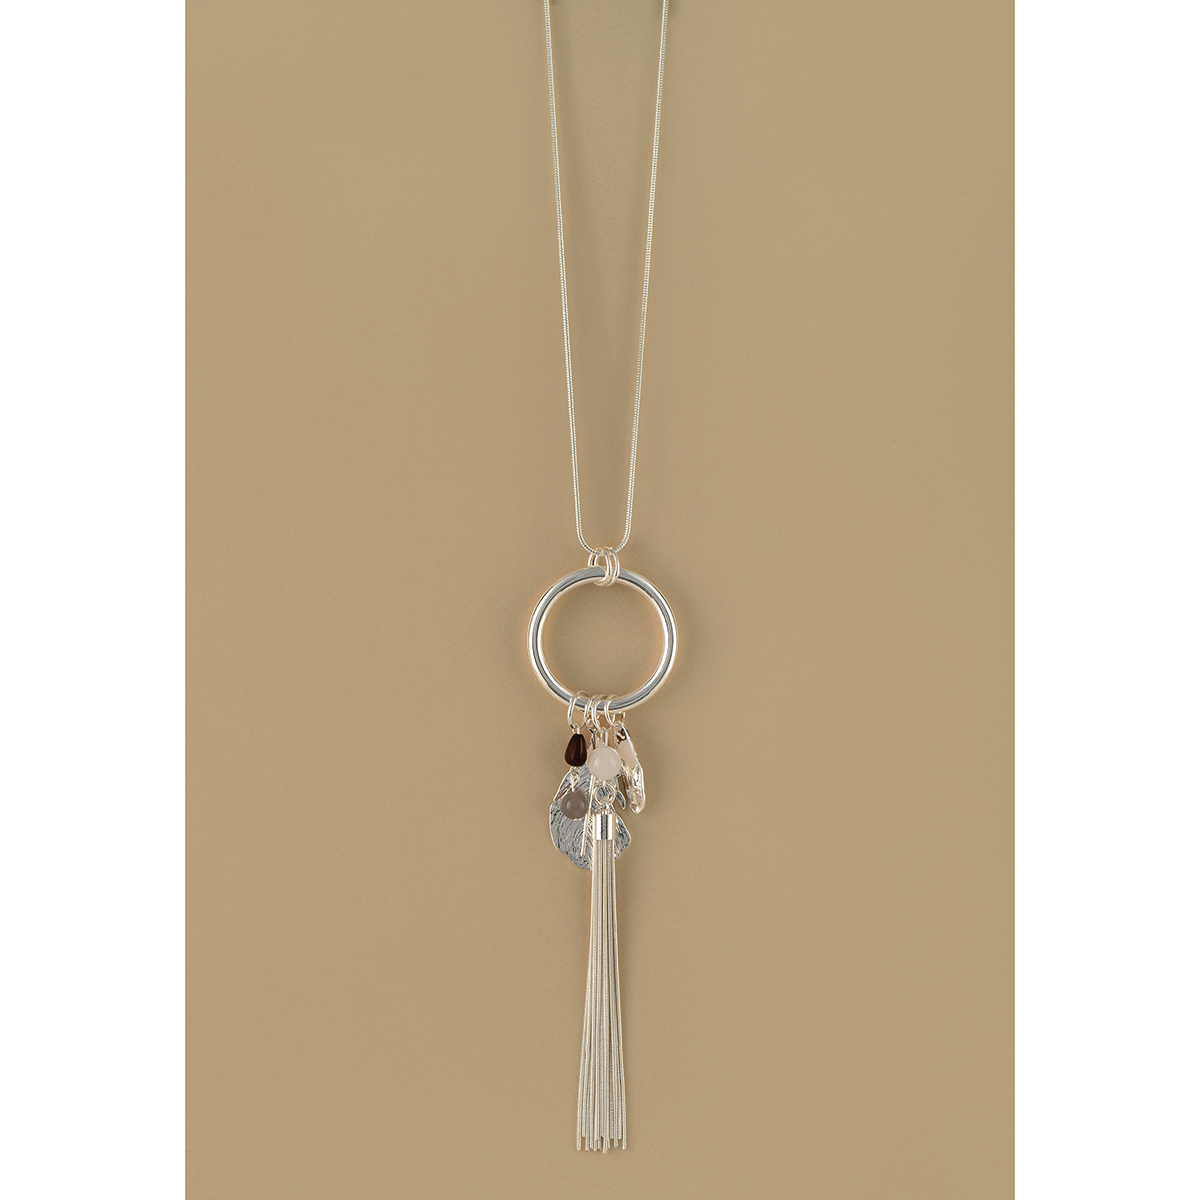 b70 NECKLACE CIRCLE WITH TASSEL 35IN/1.5IN X 7IN